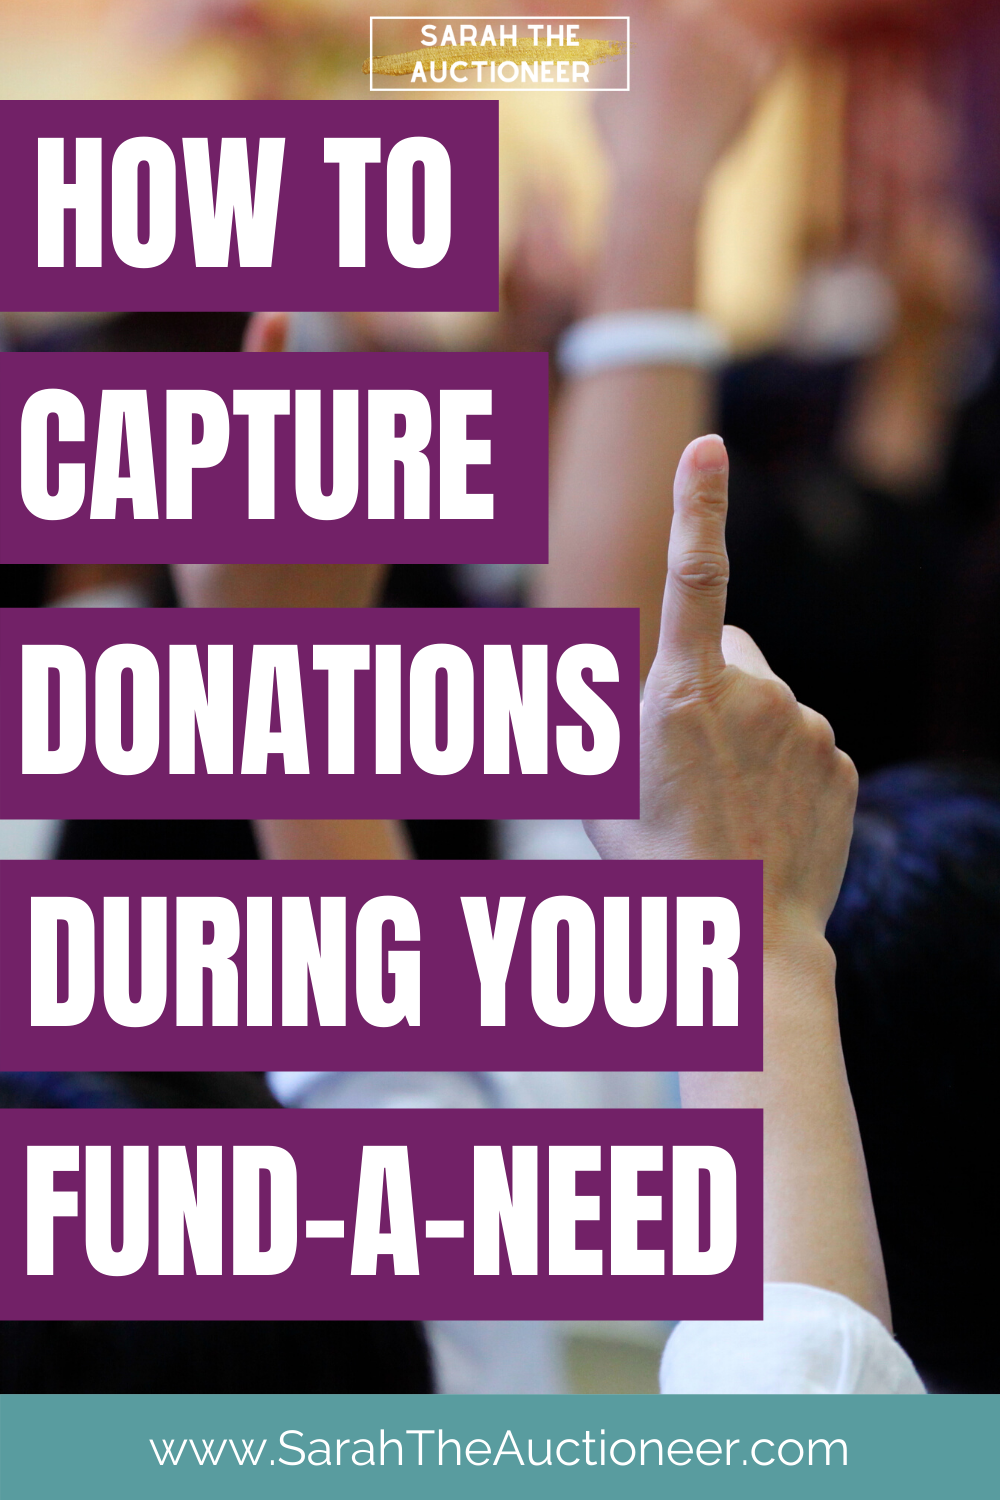 200+ Amazing Fundraising Ideas to Help You Reach Your Goals